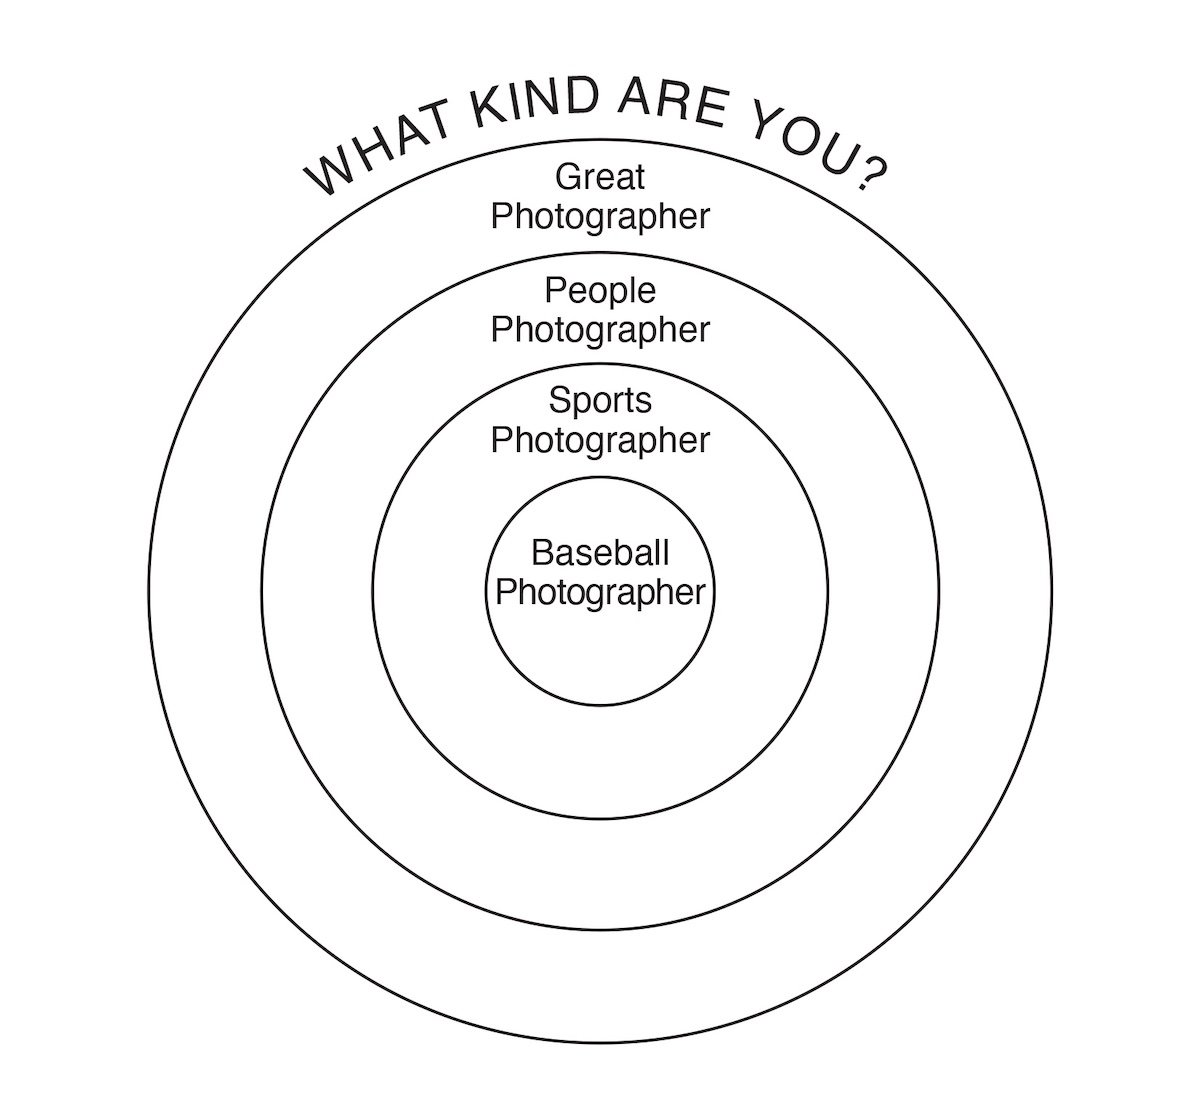 Marketing Misconception 3: Layered circle diagram illustrating general descriptors of photographic specialties on the outer circles and specific descriptors on the inside. 